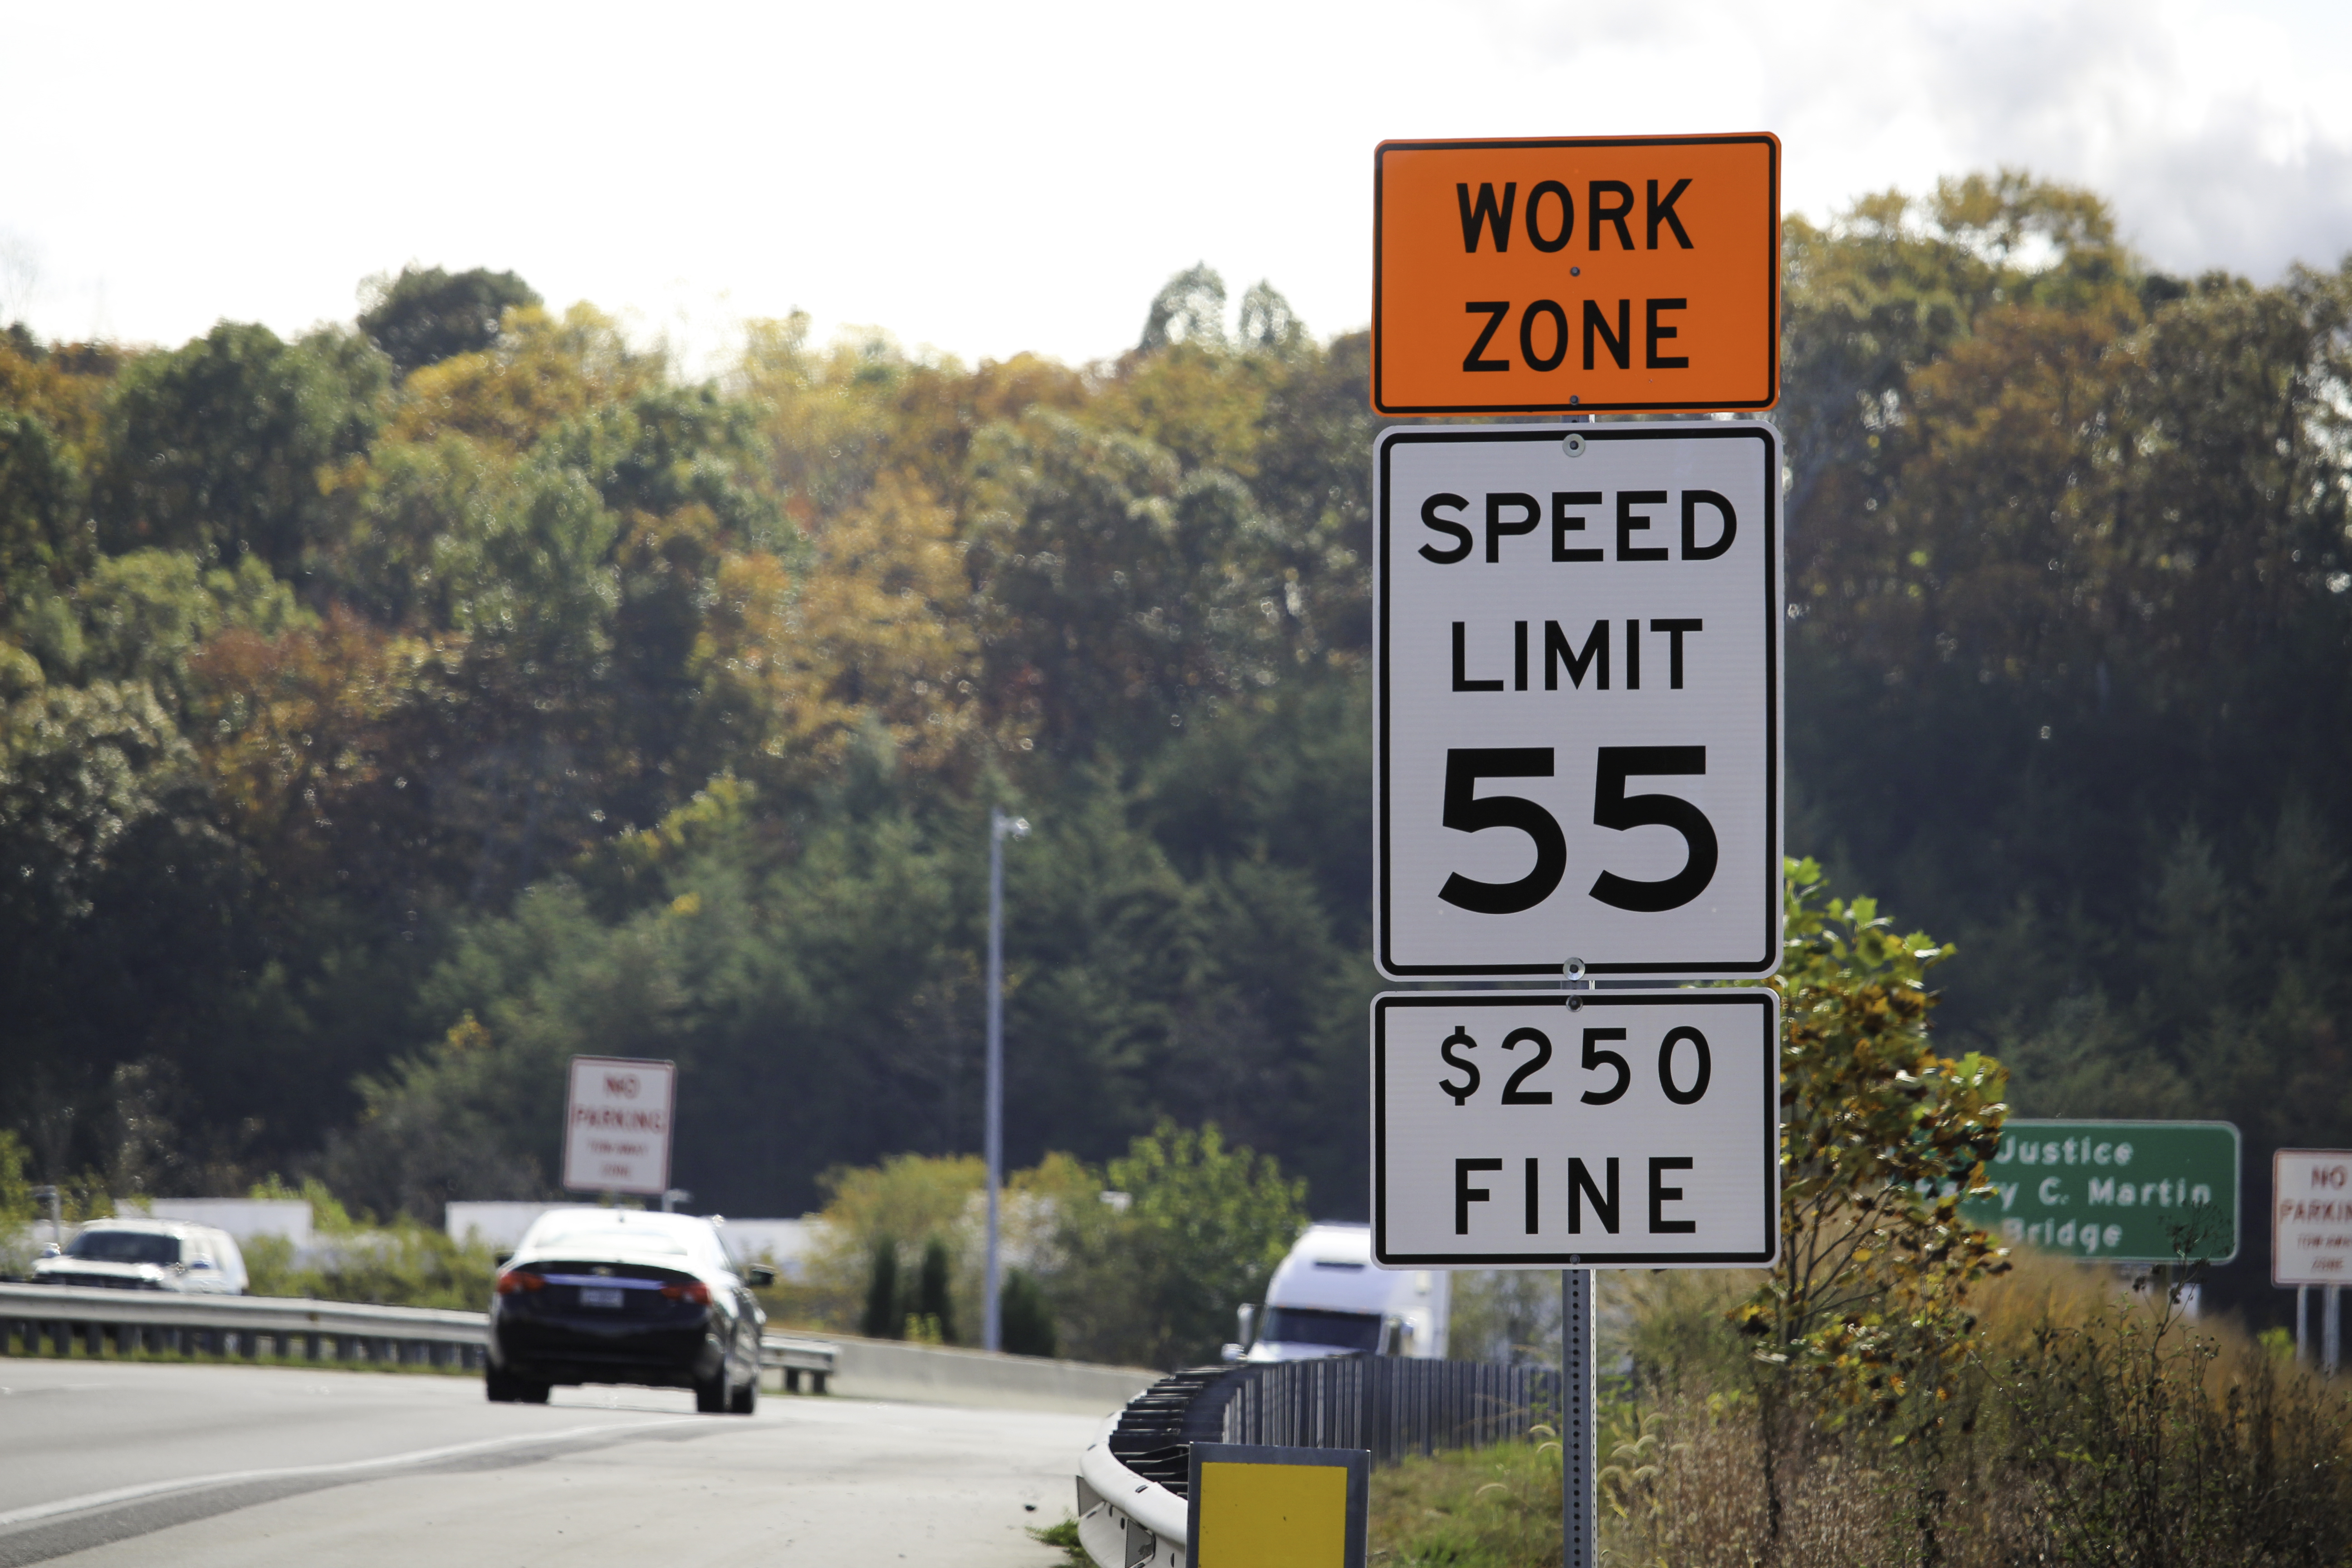 Tips about driving in work zones.